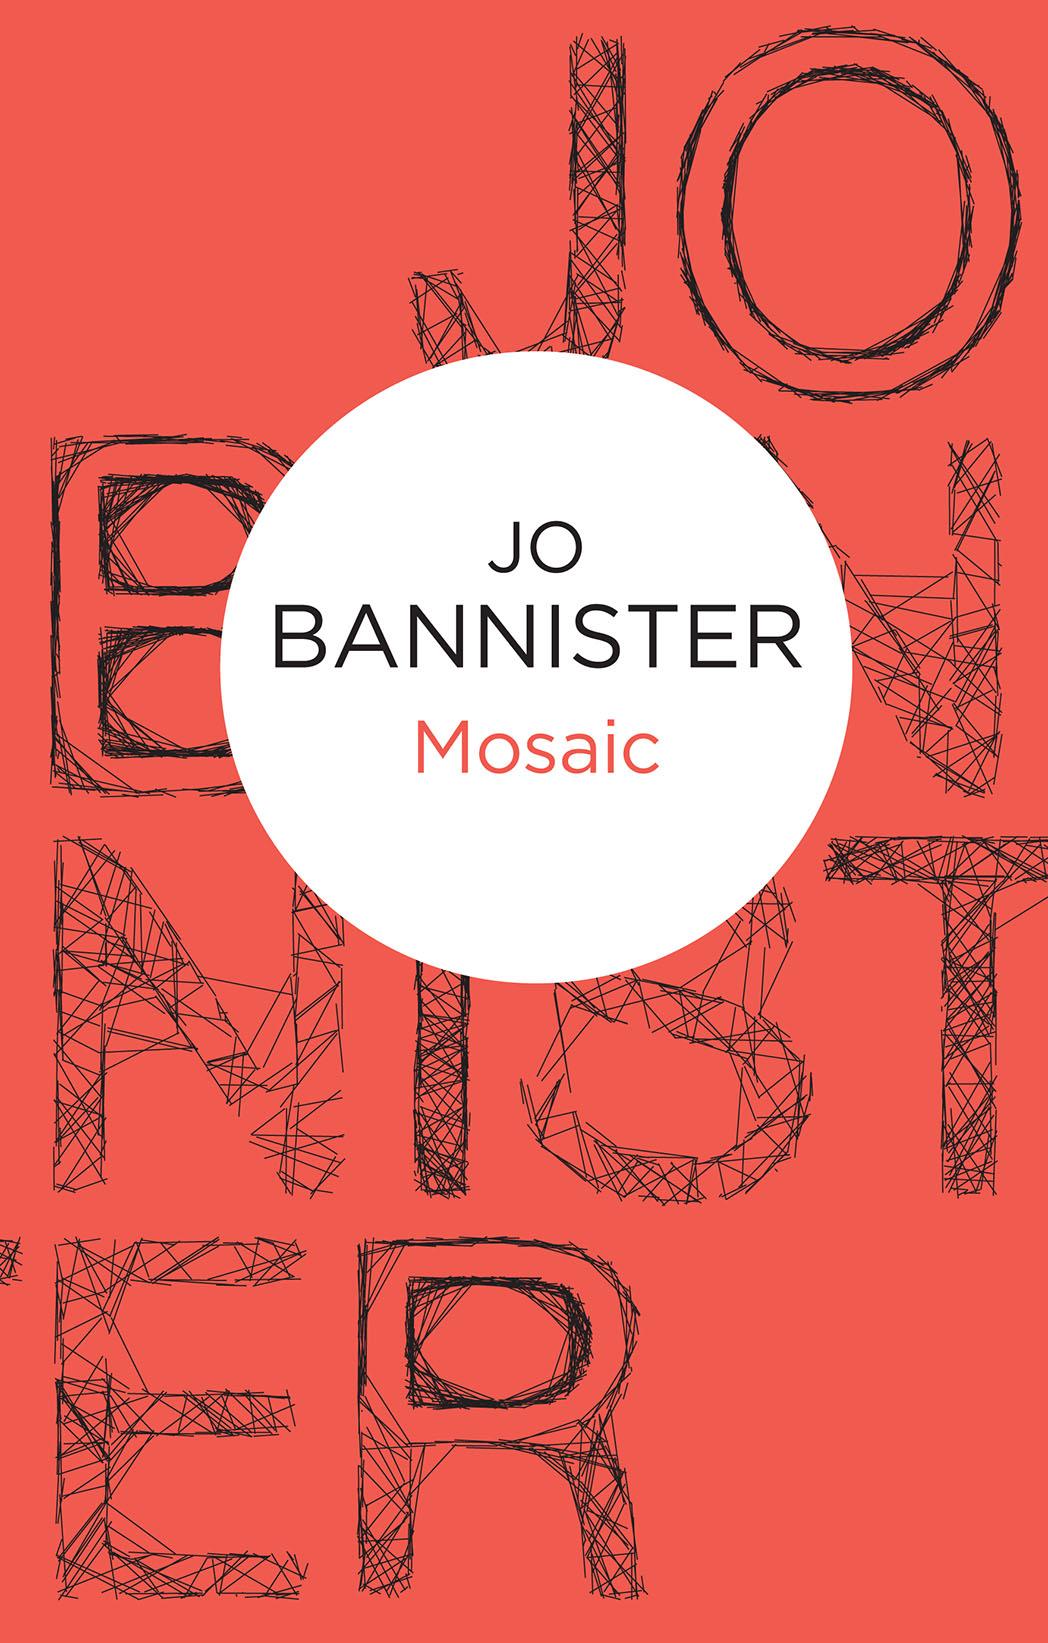 Mosaic by Jo Bannister